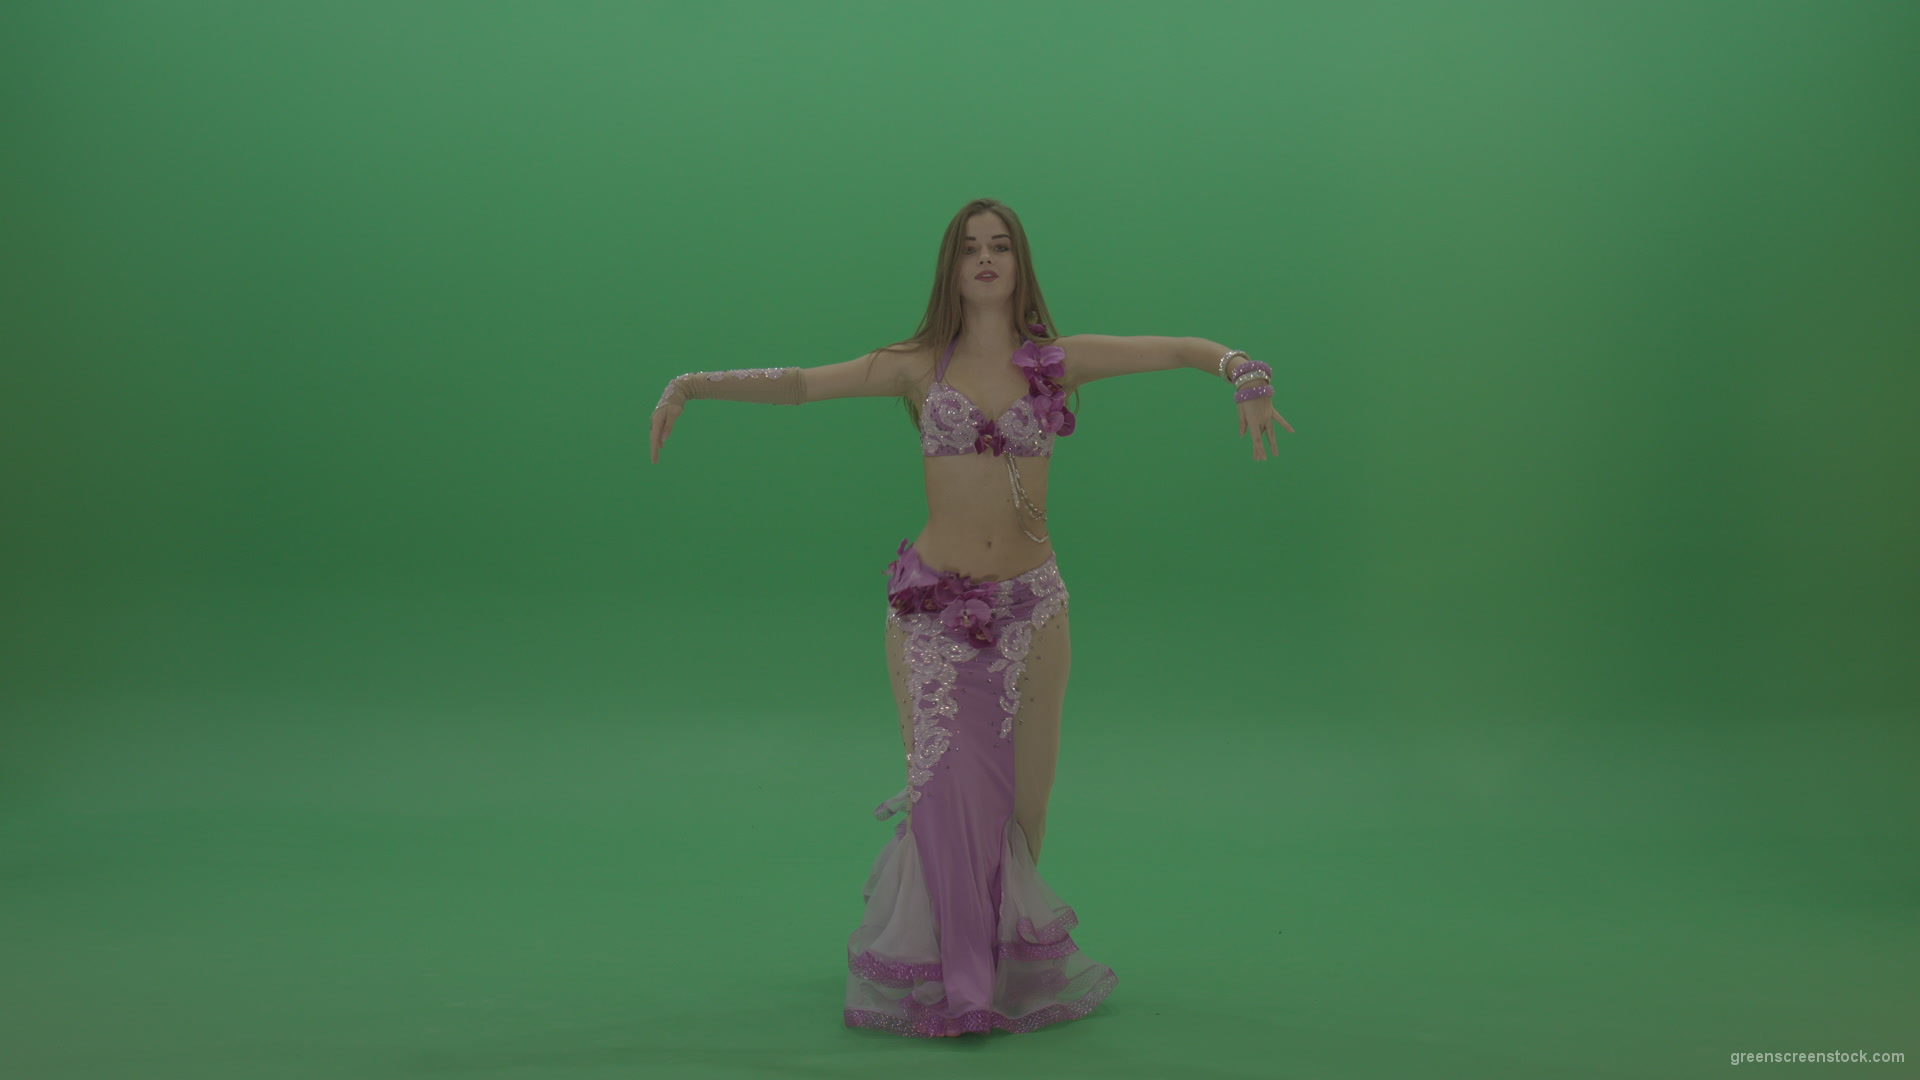 Delightful-belly-dancer-in-pink-wear-display-amazing-dance-moves-over-chromakey-background_008 Green Screen Stock